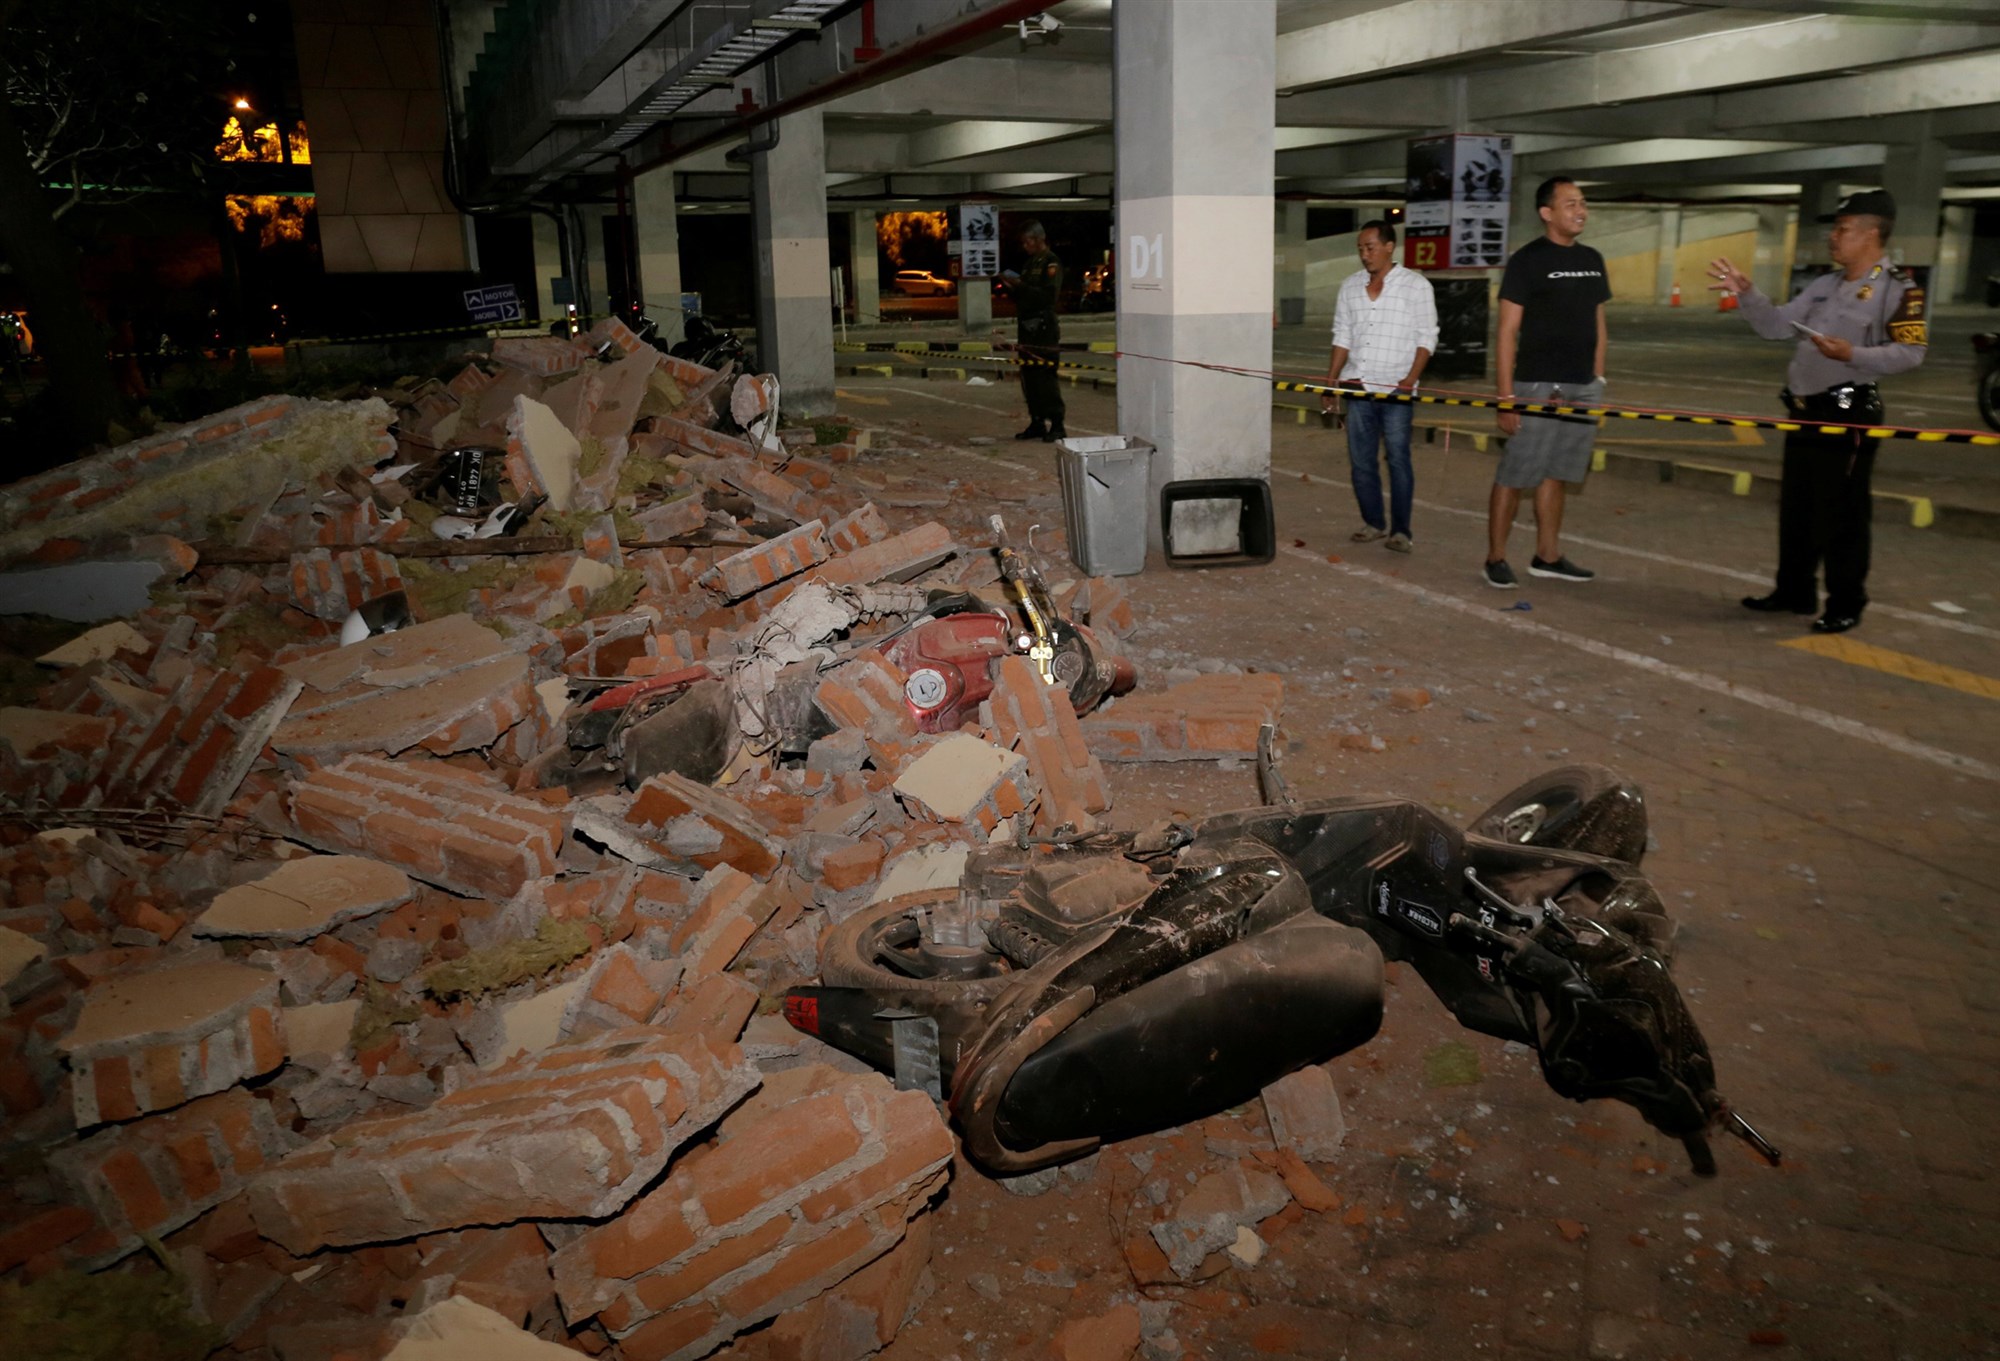 Police examine debris that crushed motorbikes Sunday at a shopping center in Kuta, Bali, Indonesia, following a strong earthquake on nearby Lombok island.Johannes Christo / Reuters